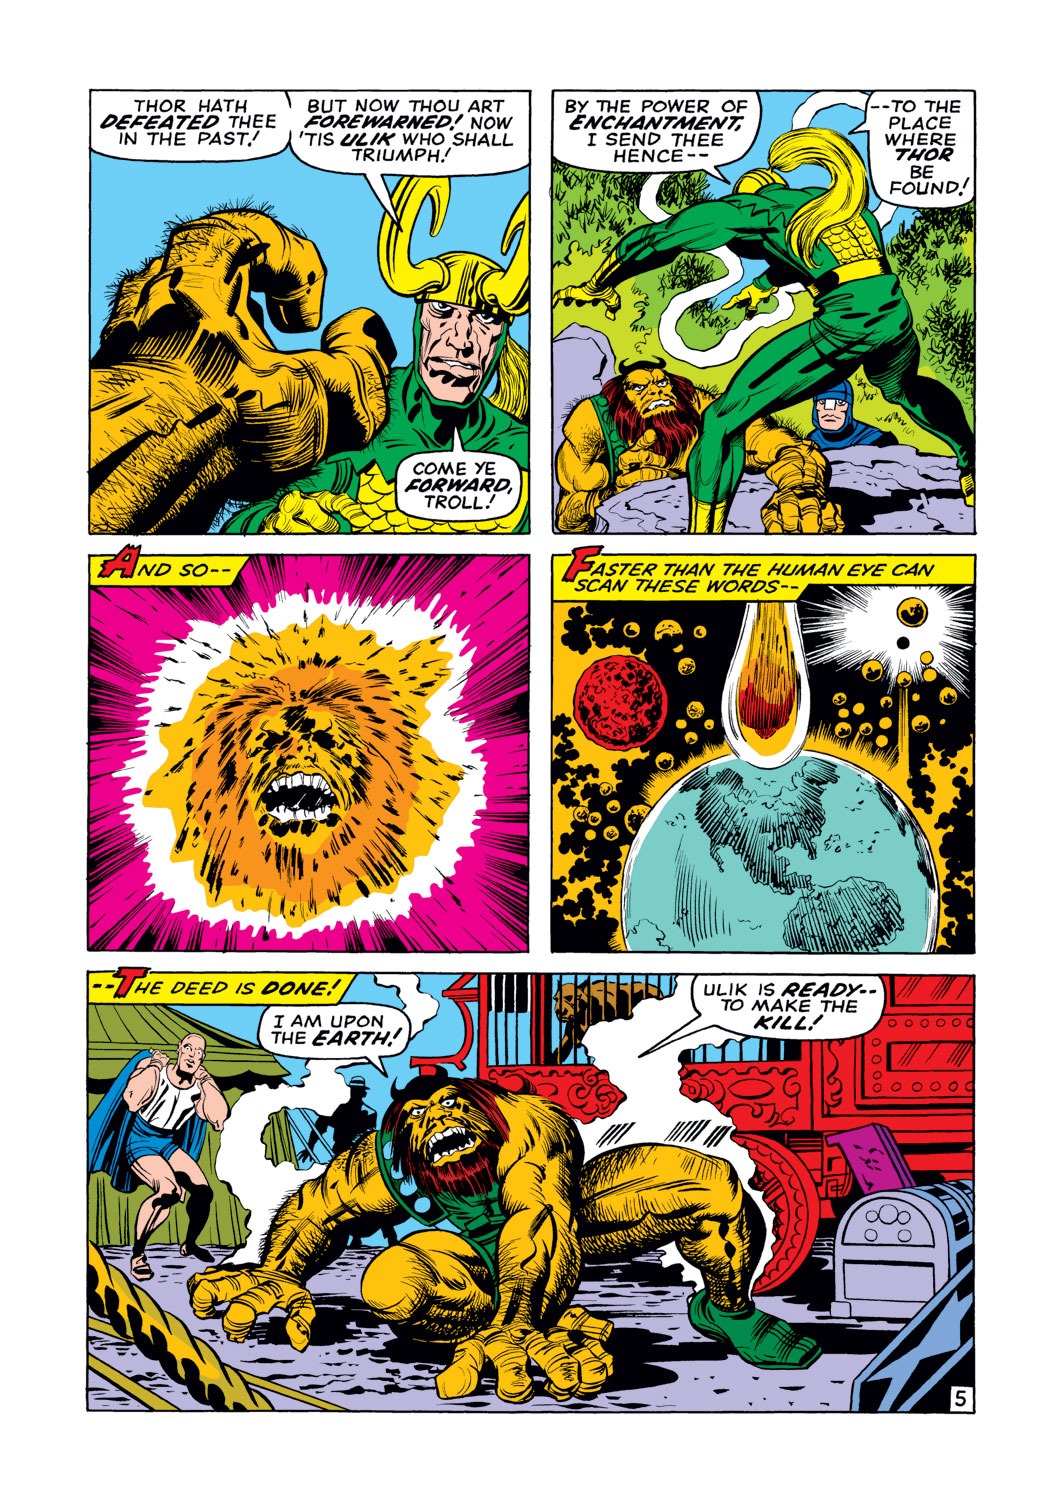 Thor (1966) 173 Page 5